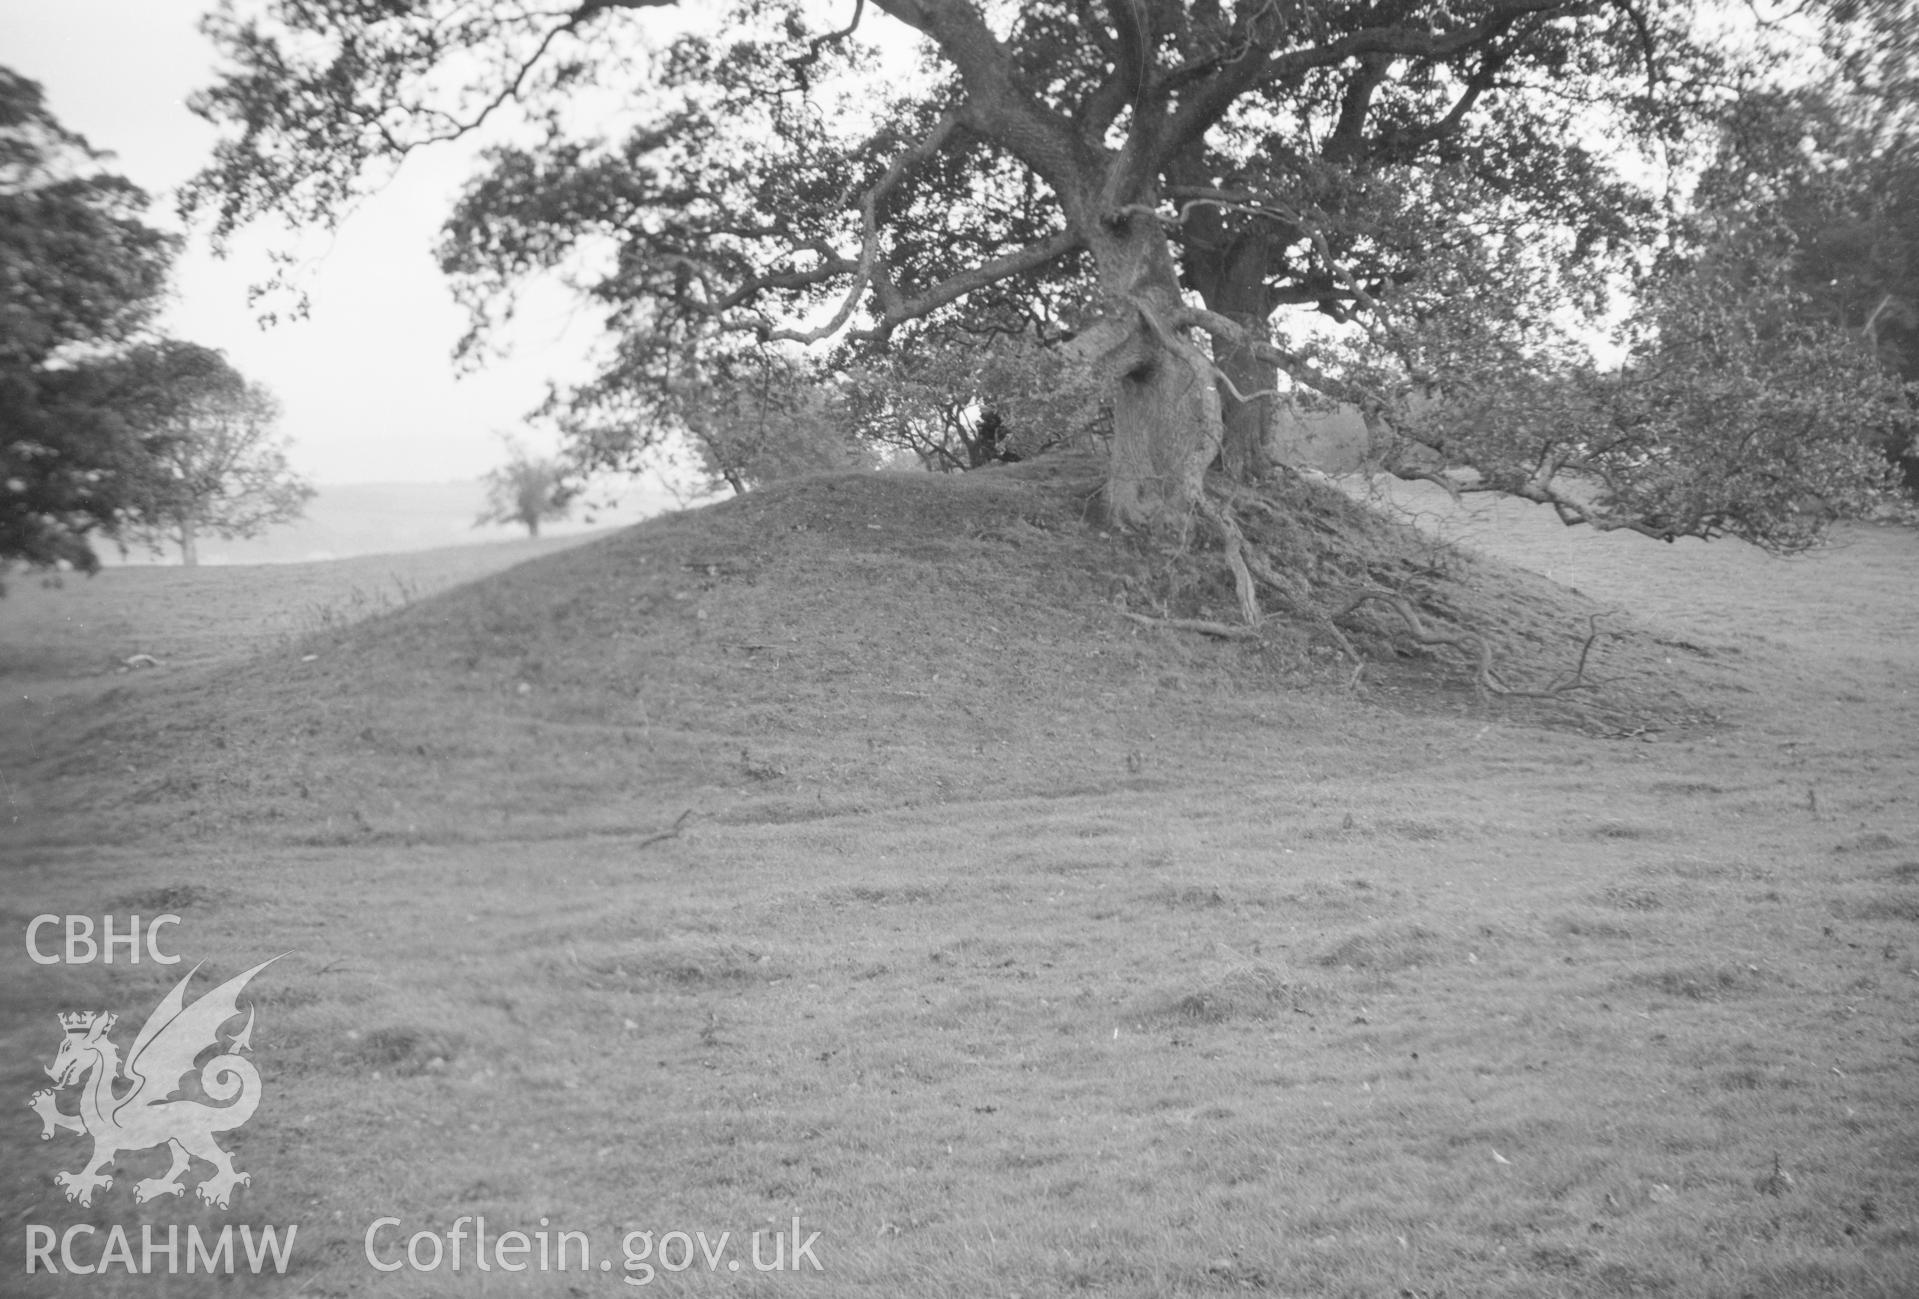 Digital copy of a nitrate negative showing Bryn-yr-Hen-Bobl, Llanddaniel Fab. From the Cadw Monuments in Care Collection.